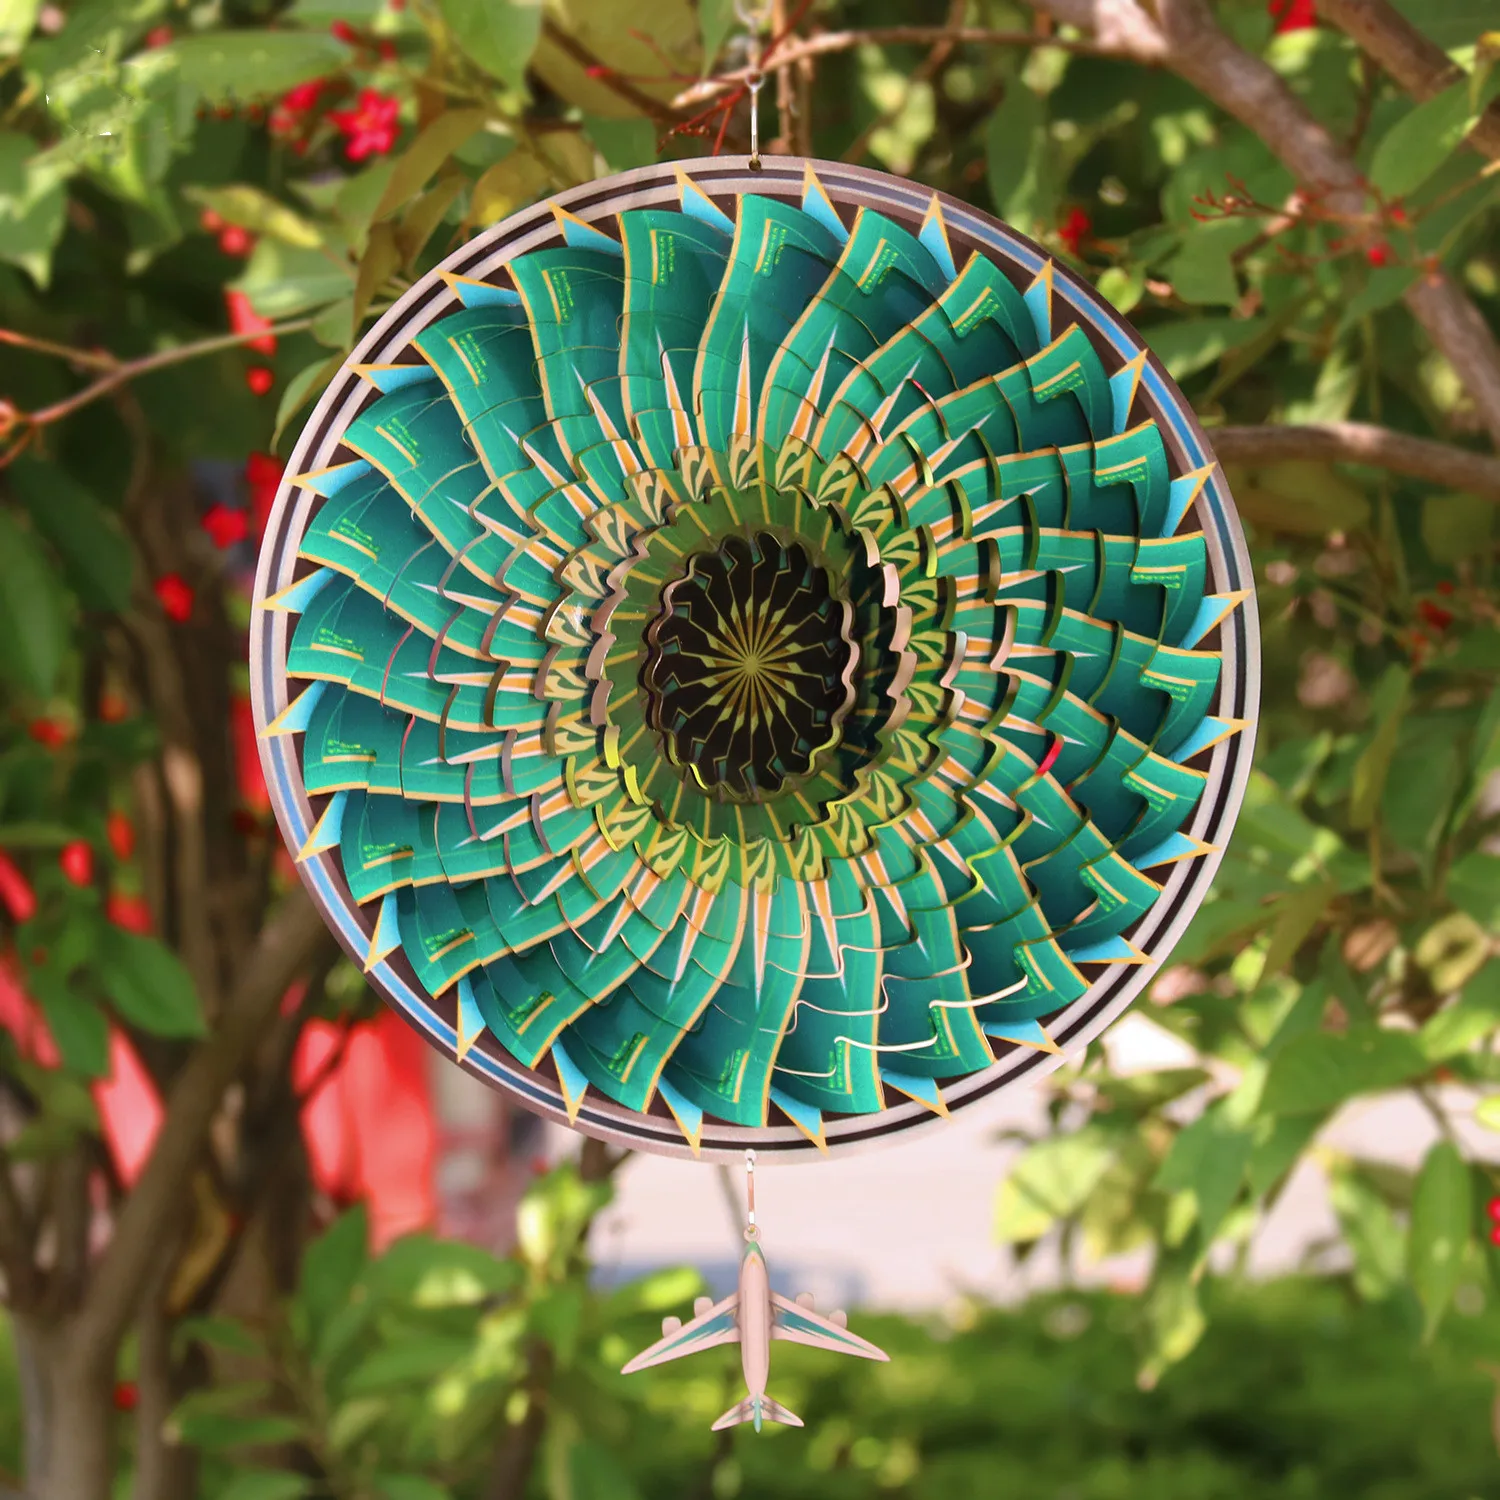 VERLIAN Hanging Wind Spinner with Sun Catcher Tail 3D Outdoor Metal Decor Wind Spinner Yard Garden Outside Stainless Steel Spinner Gift Indoor Decoration Crafts Ornaments 6 Inches 